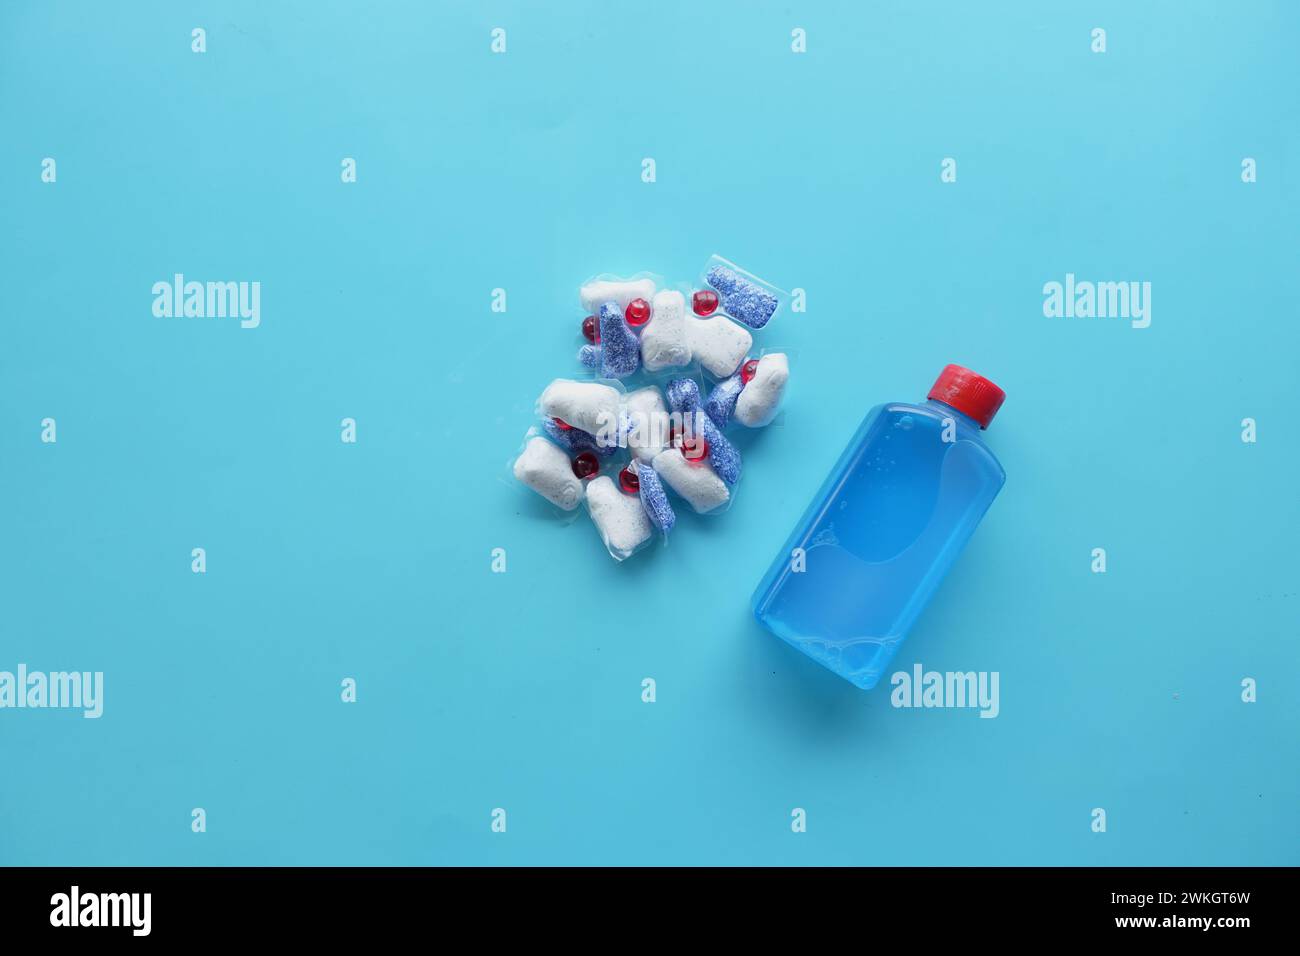 A stack of dishwasher tablets and a bottle of detergent on a blue background Stock Photo